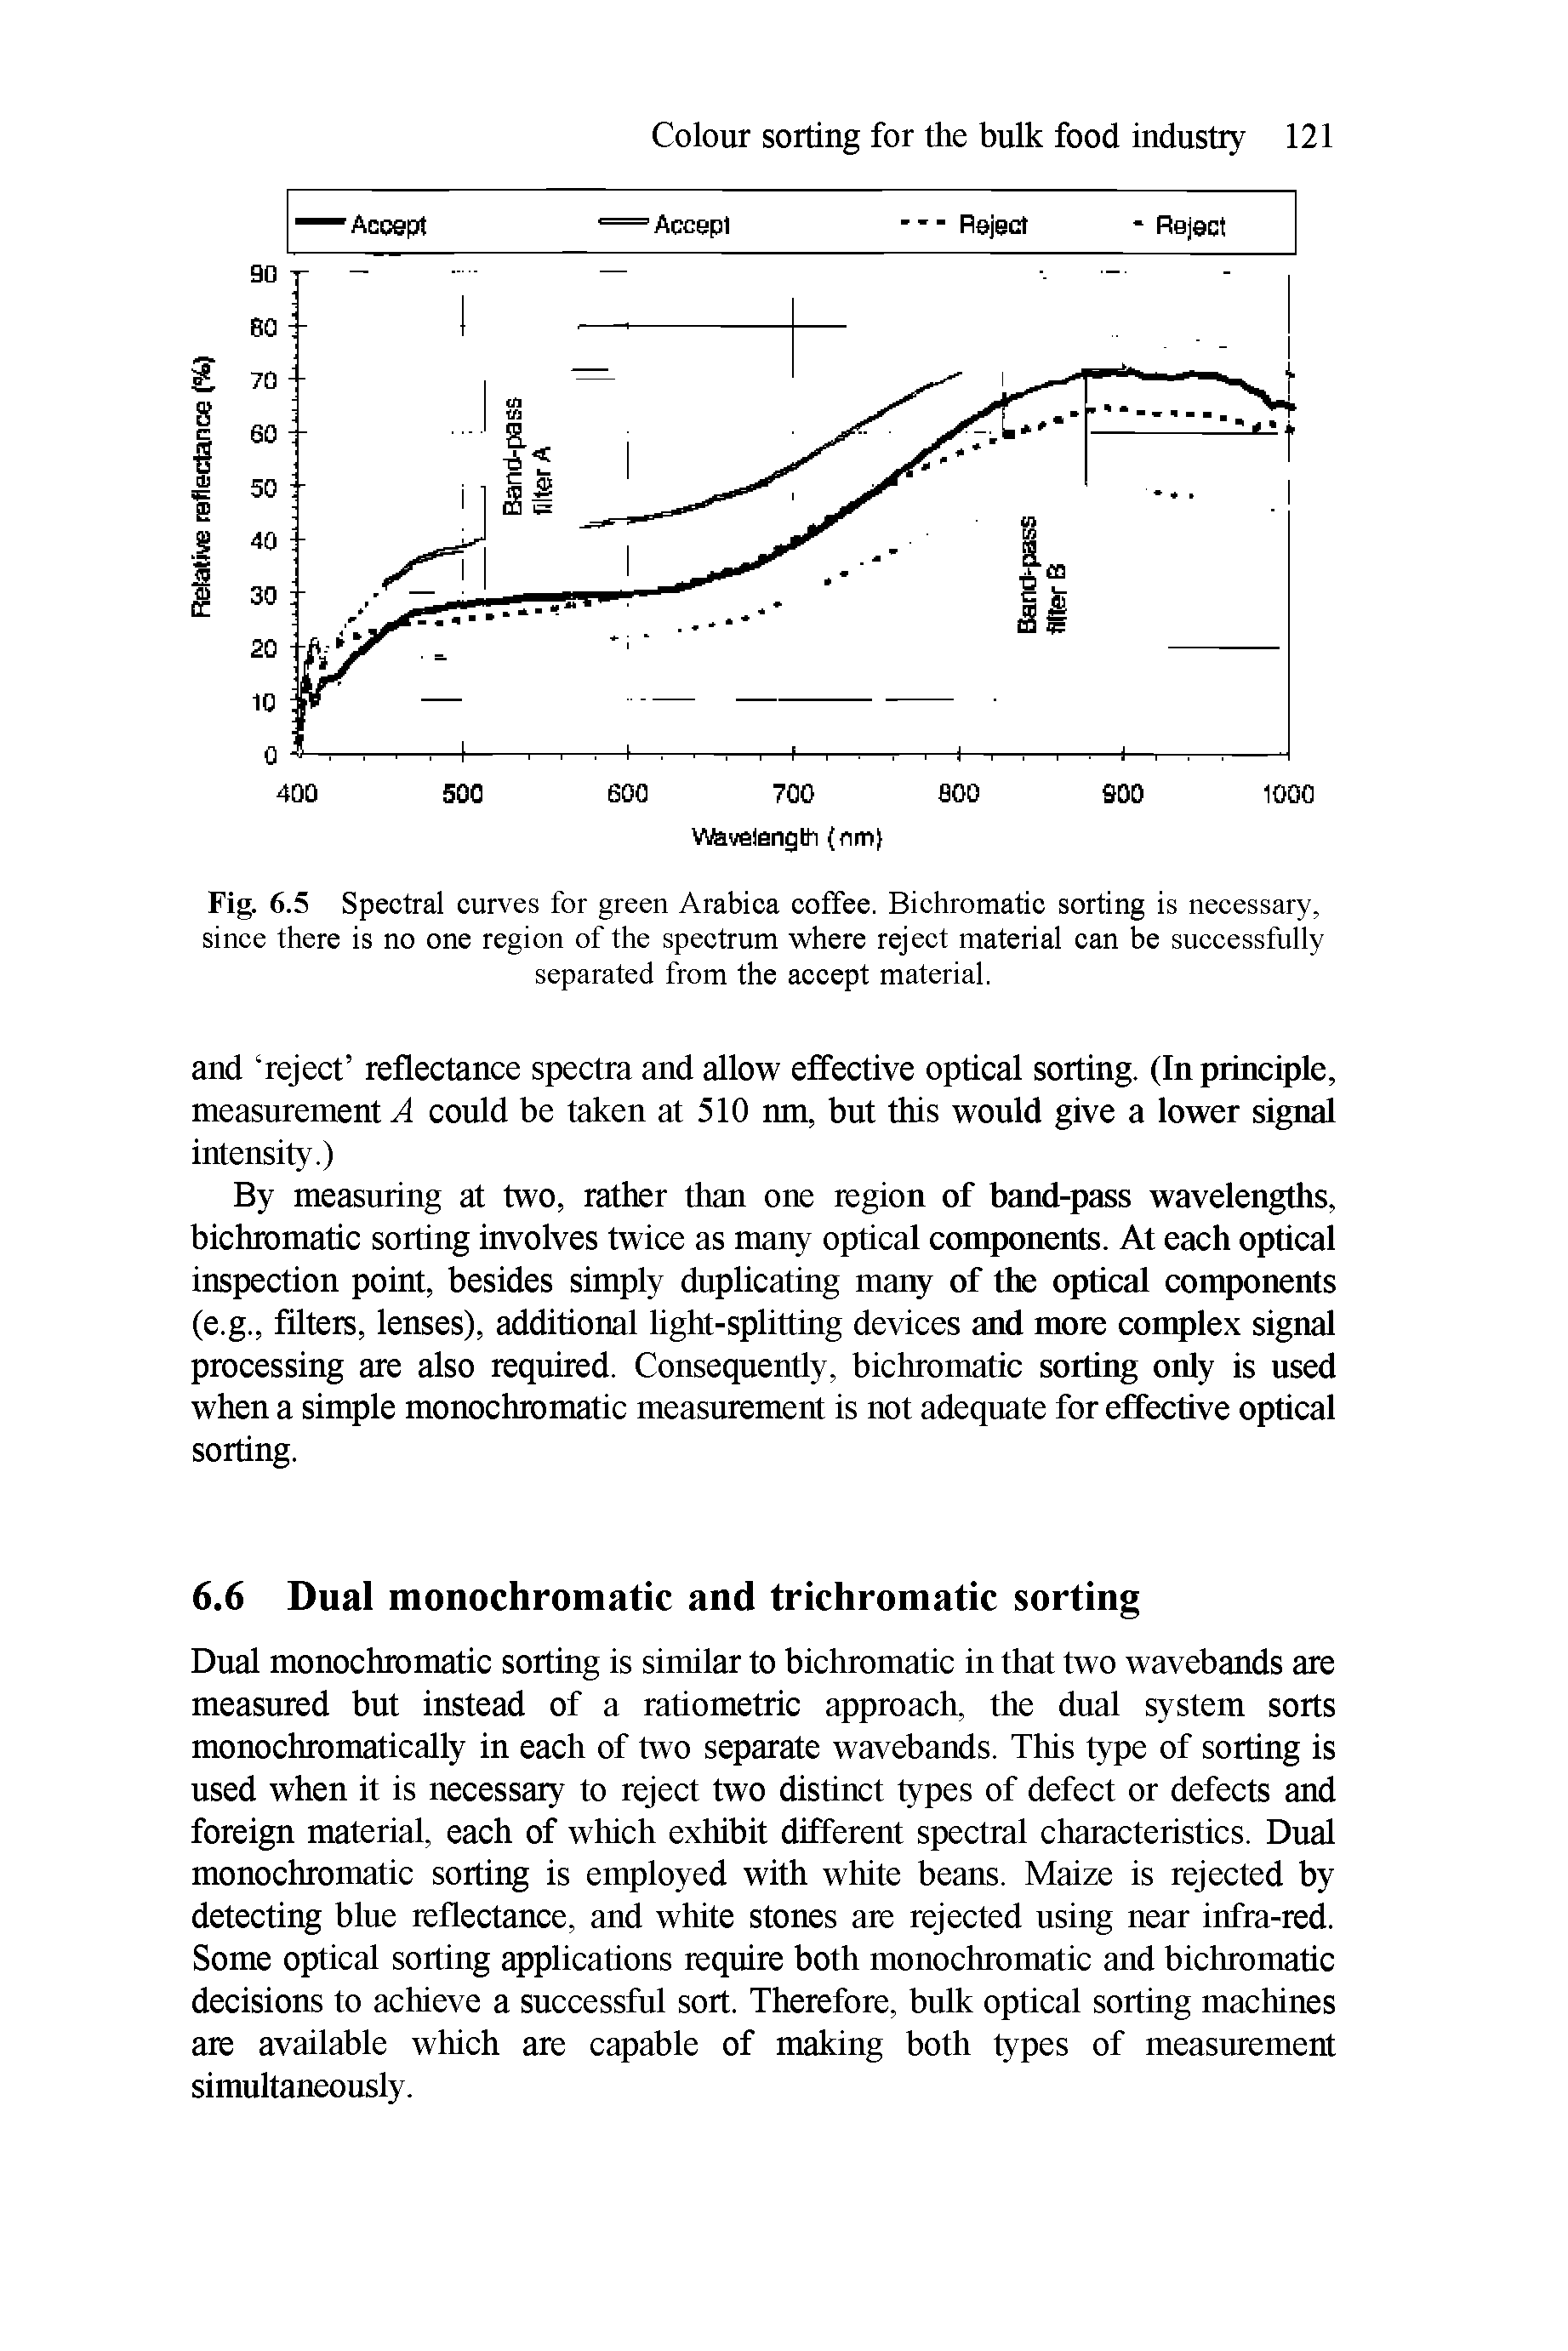 Fig. 6.5 Spectral curves for green Arabica coffee. Bichromatic sorting is necessary, since there is no one region of the spectrum where reject material can be successfully separated from the accept material.